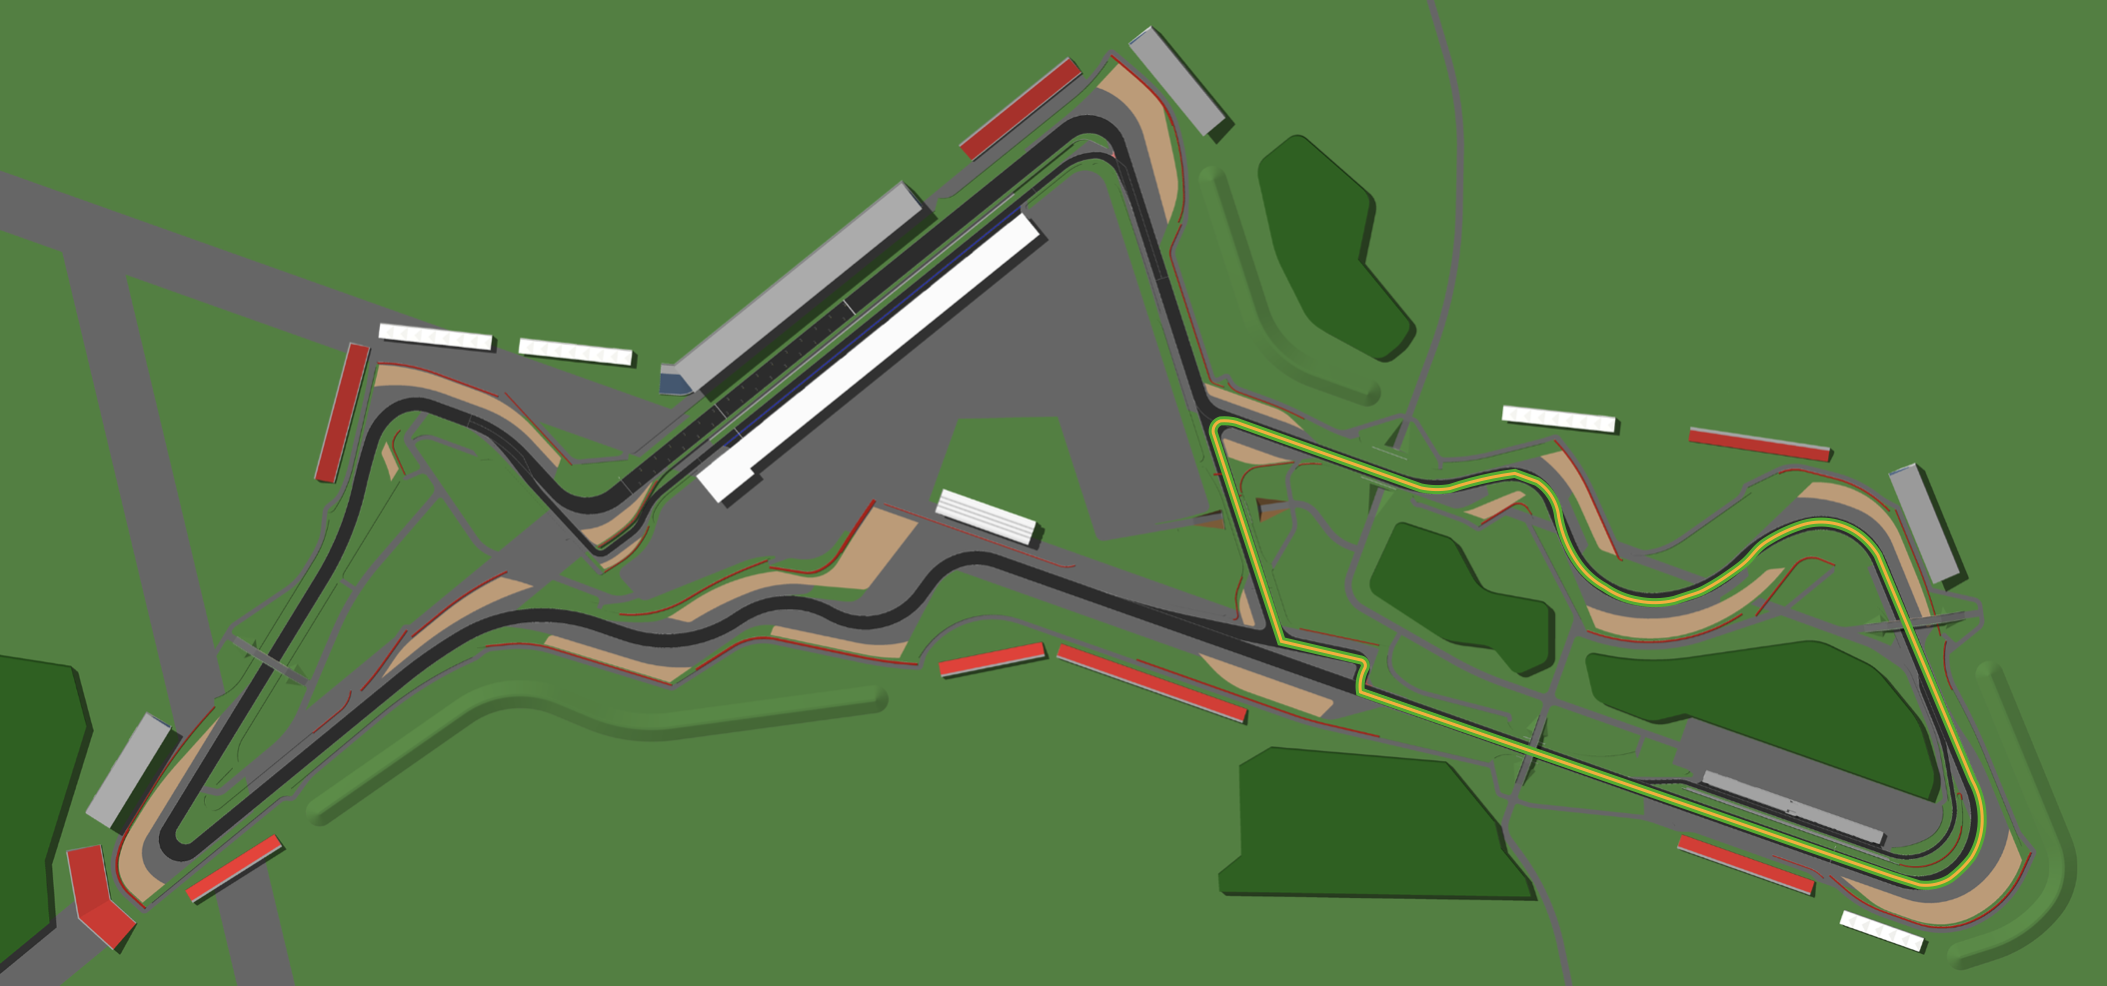 Small track layout